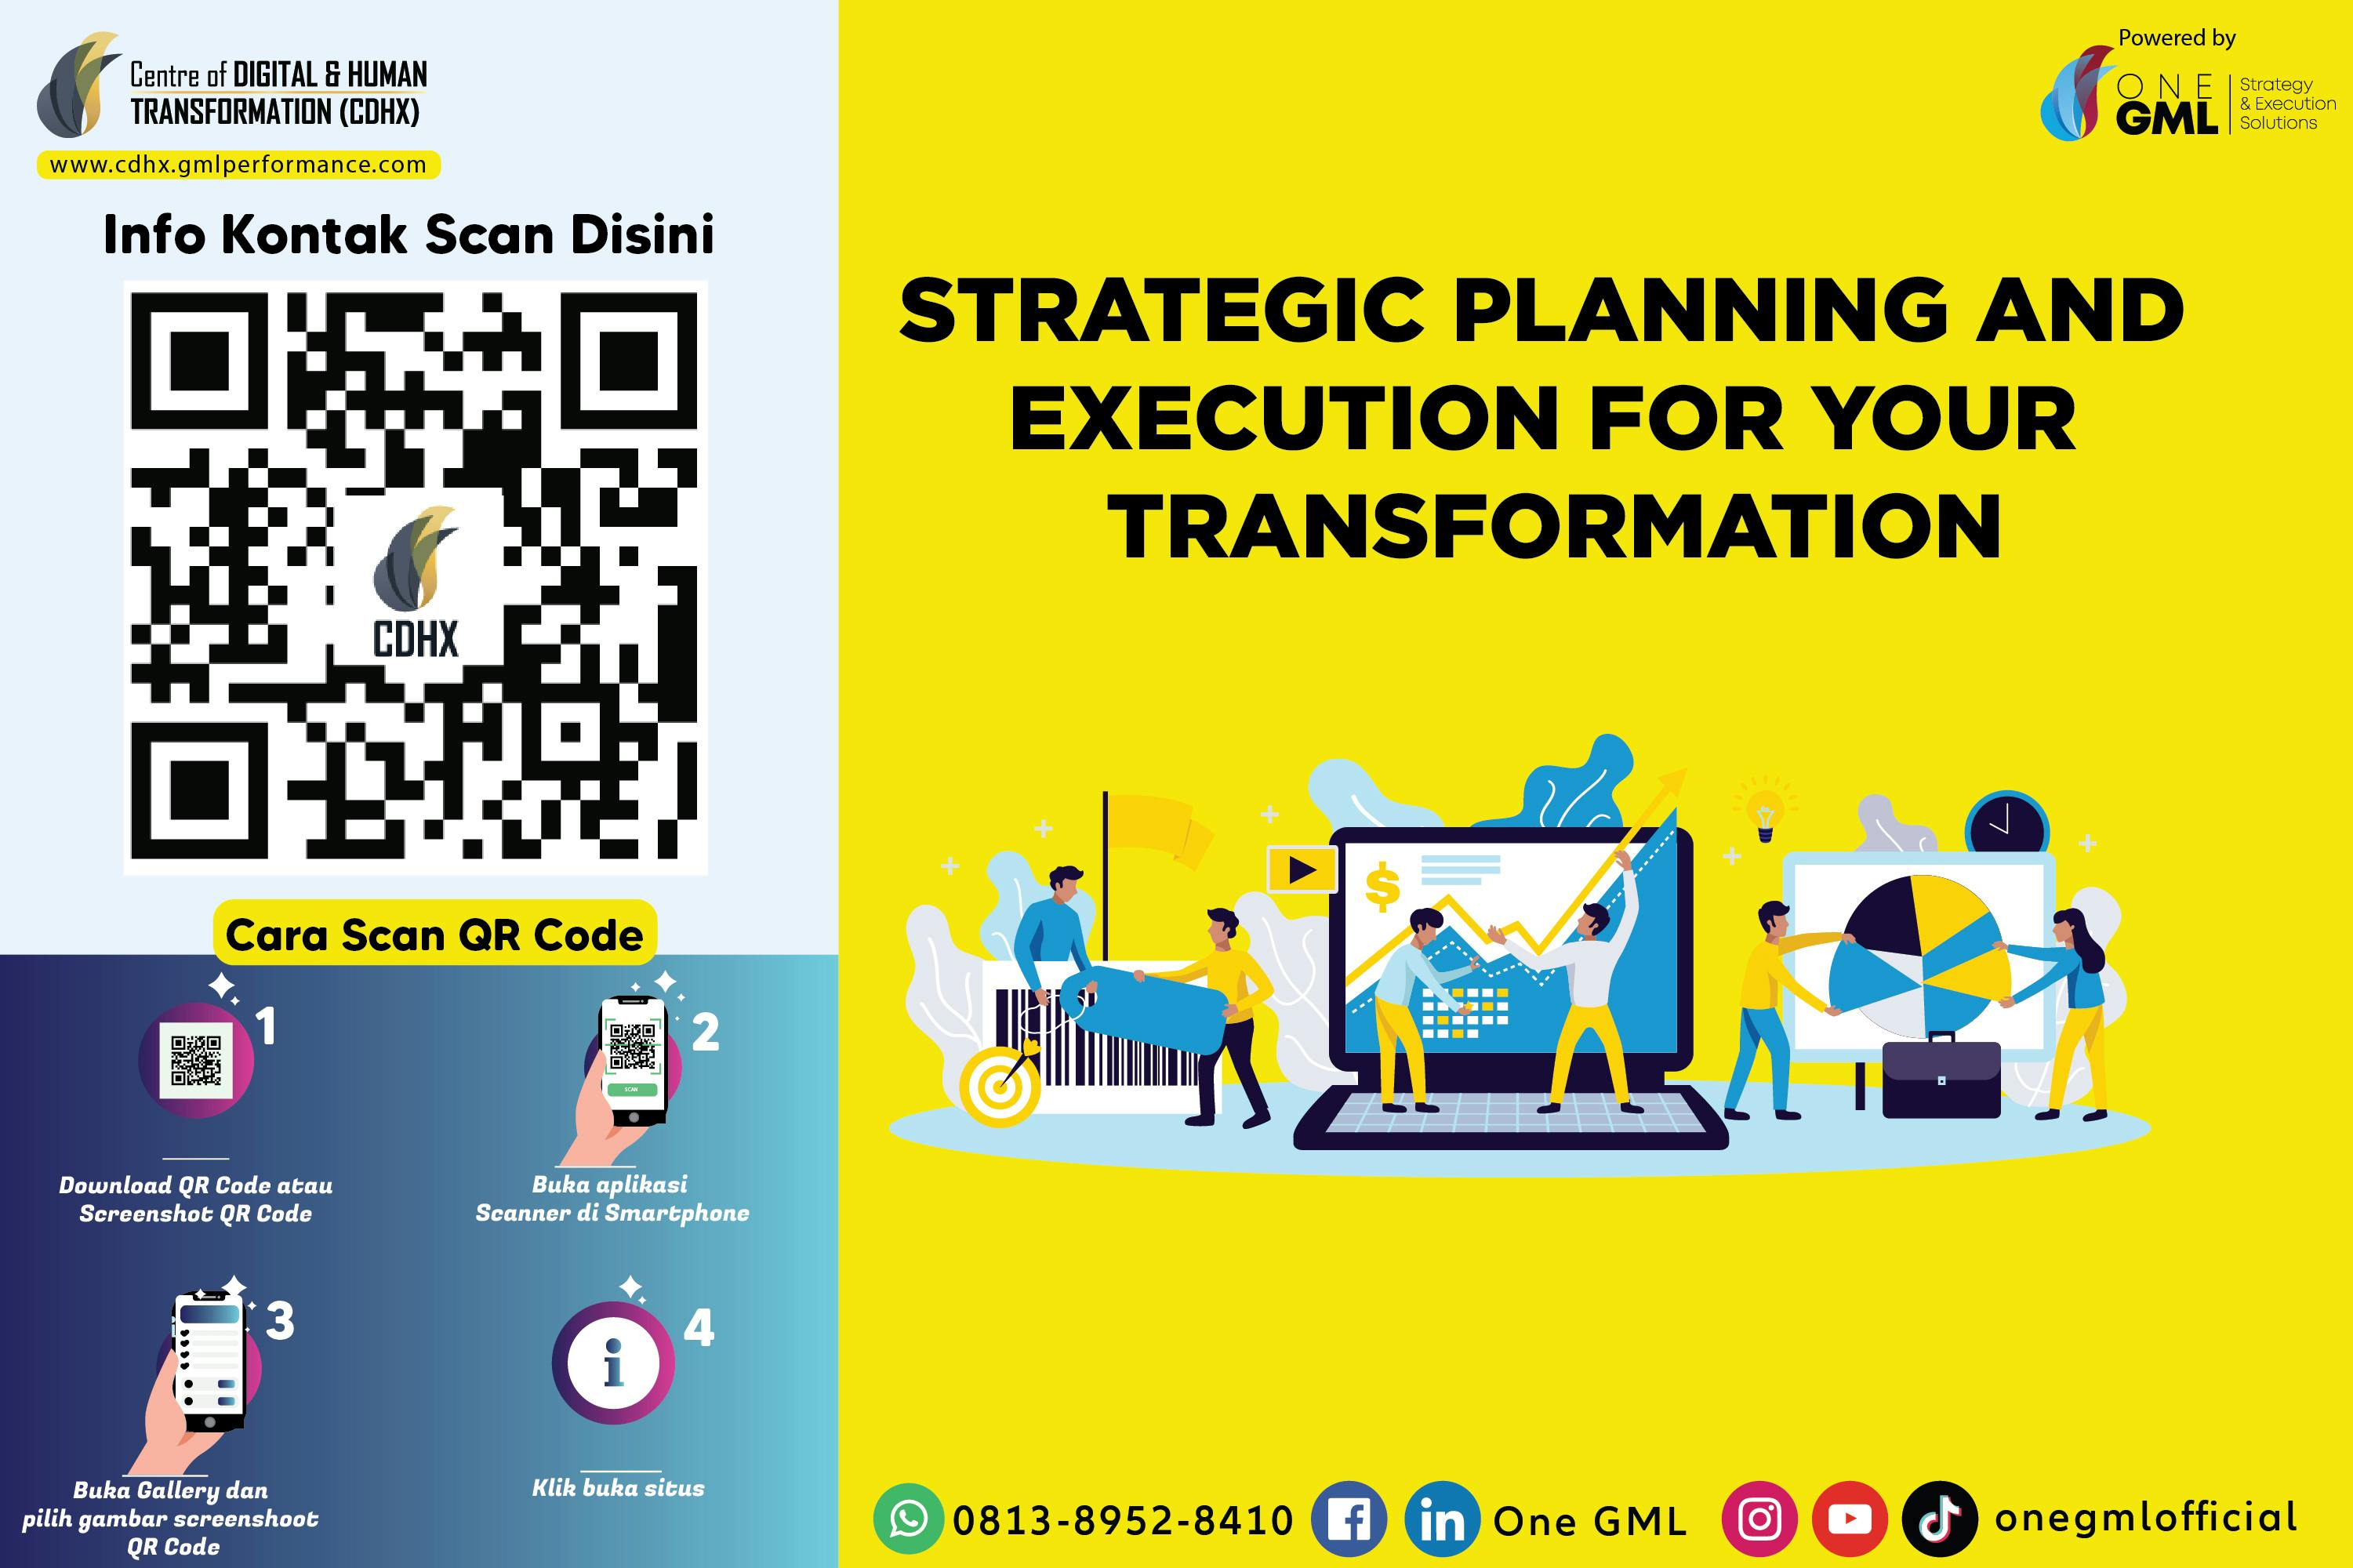 Strategic Planning and Execution for your Transformation